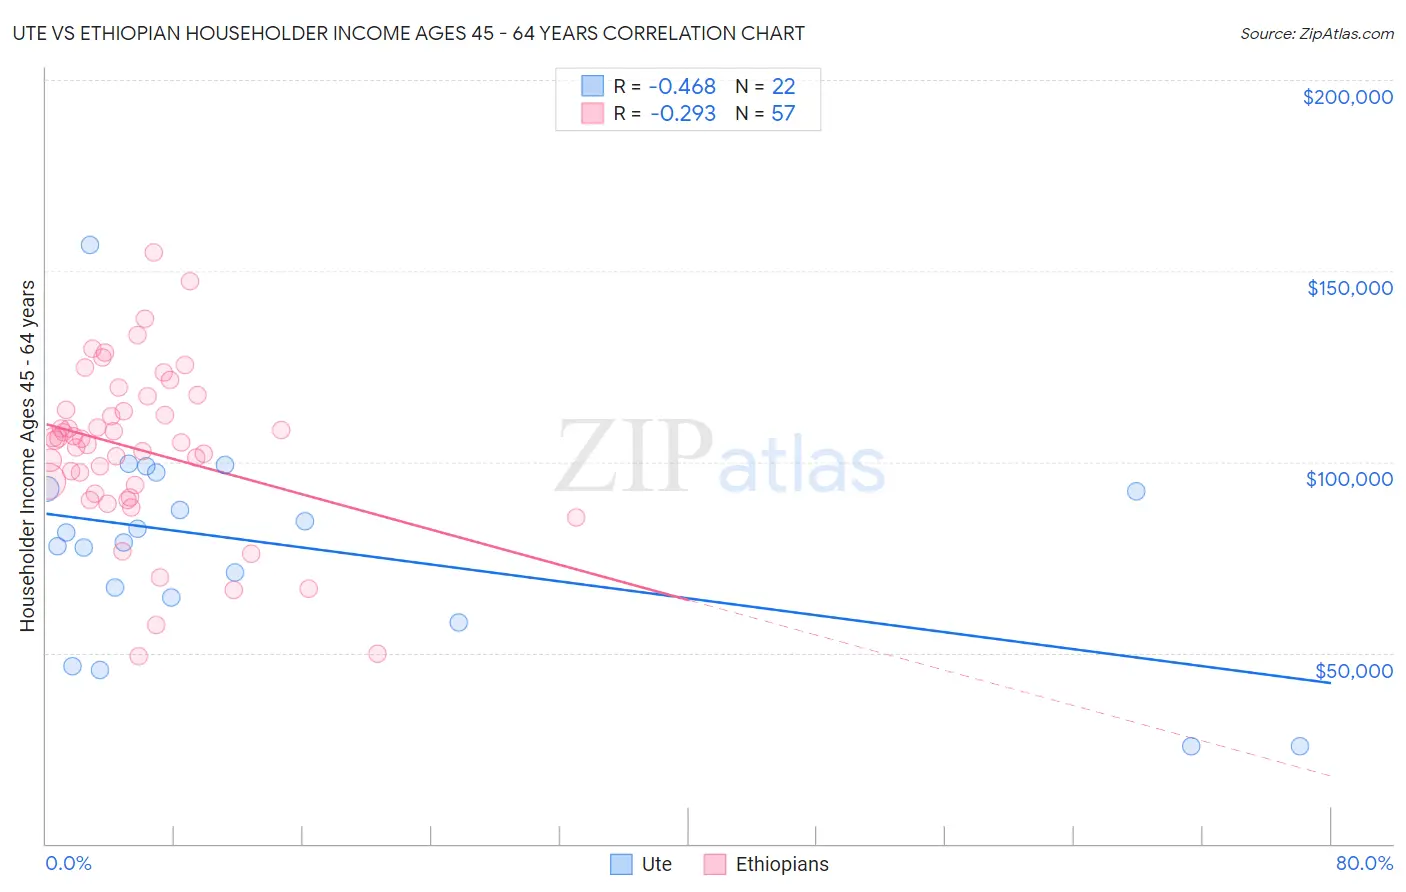 Ute vs Ethiopian Householder Income Ages 45 - 64 years